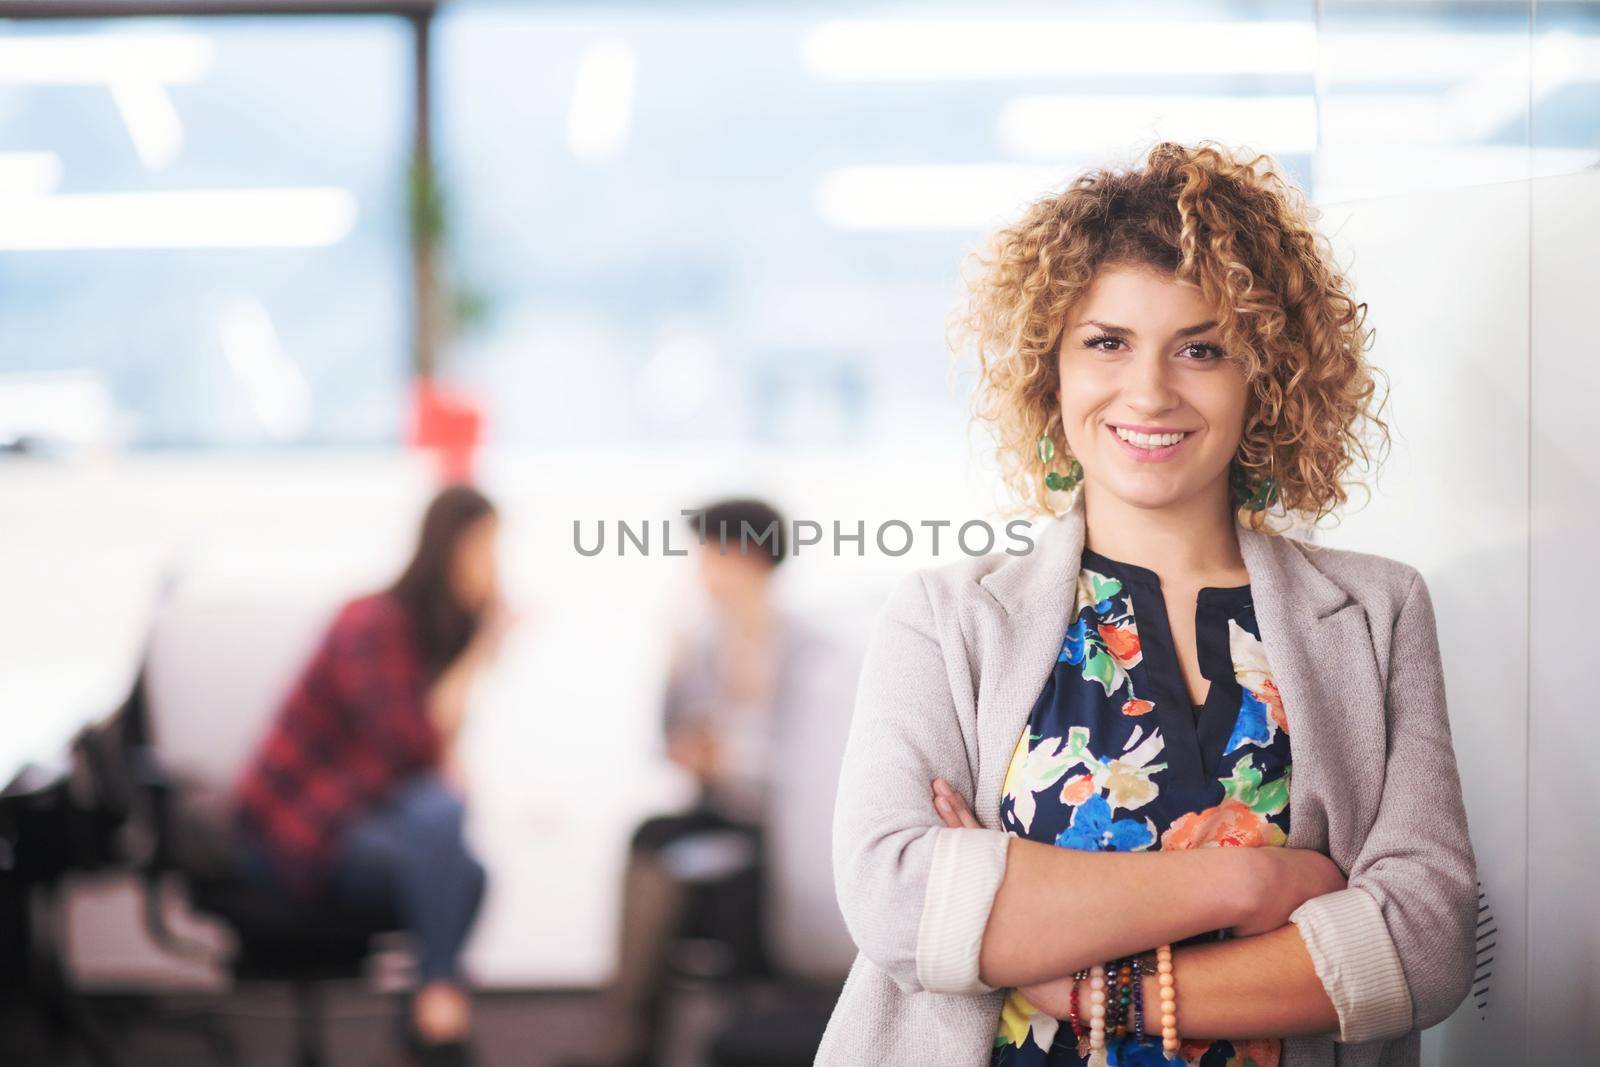 Portrait of successful female software developer with a curly hairstyle at modern startup office